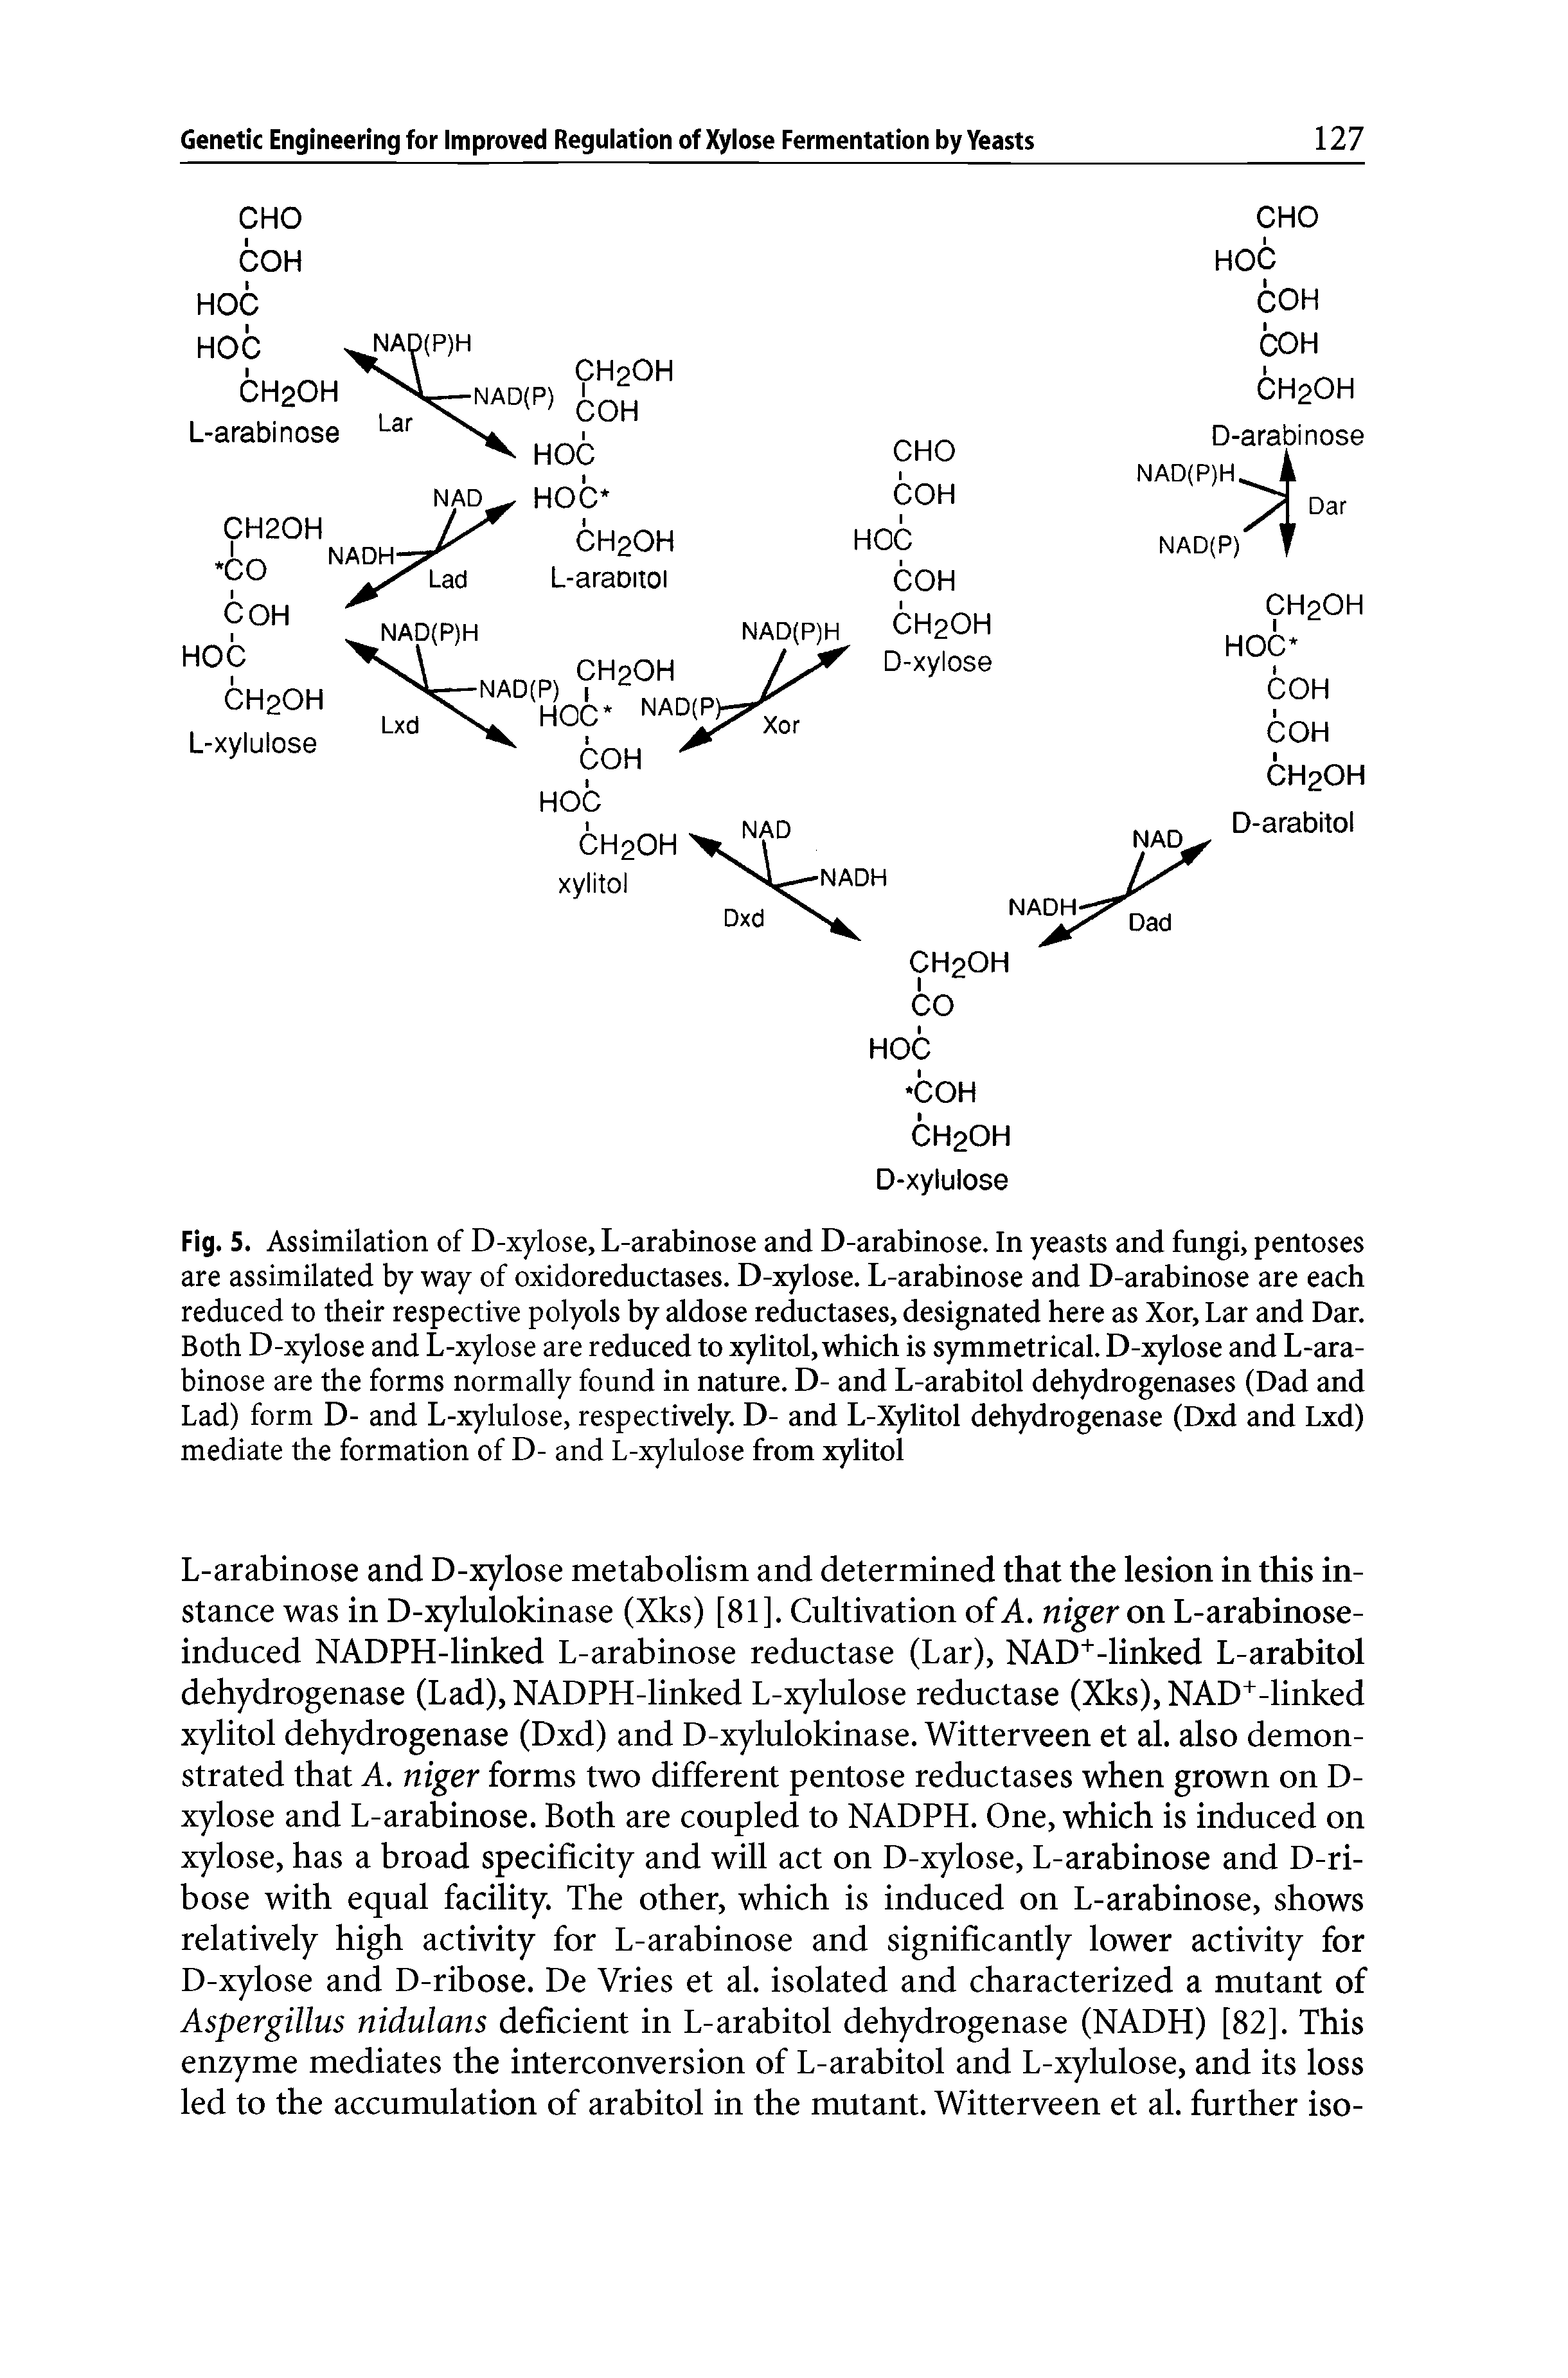 Fig. 5. Assimilation of D-xylose, L-arabinose and D-arabinose. In yeasts and fungi, pentoses are assimilated by way of oxidoreductases. D-xylose. L-arabinose and D-arabinose are each reduced to their respective polyols by aldose reductases, designated here as Xor, Lar and Dar. Both D-xylose and L-xylose are reduced to xylitol, which is symmetrical. D-xylose and L-arabinose are the forms normally found in nature. D- and L-arabitol dehydrogenases (Dad and Lad) form D- and L-xylulose, respectively. D- and L-Xylitol dehydrogenase (Dxd and Lxd) mediate the formation of D- and L-xylulose from xylitol...